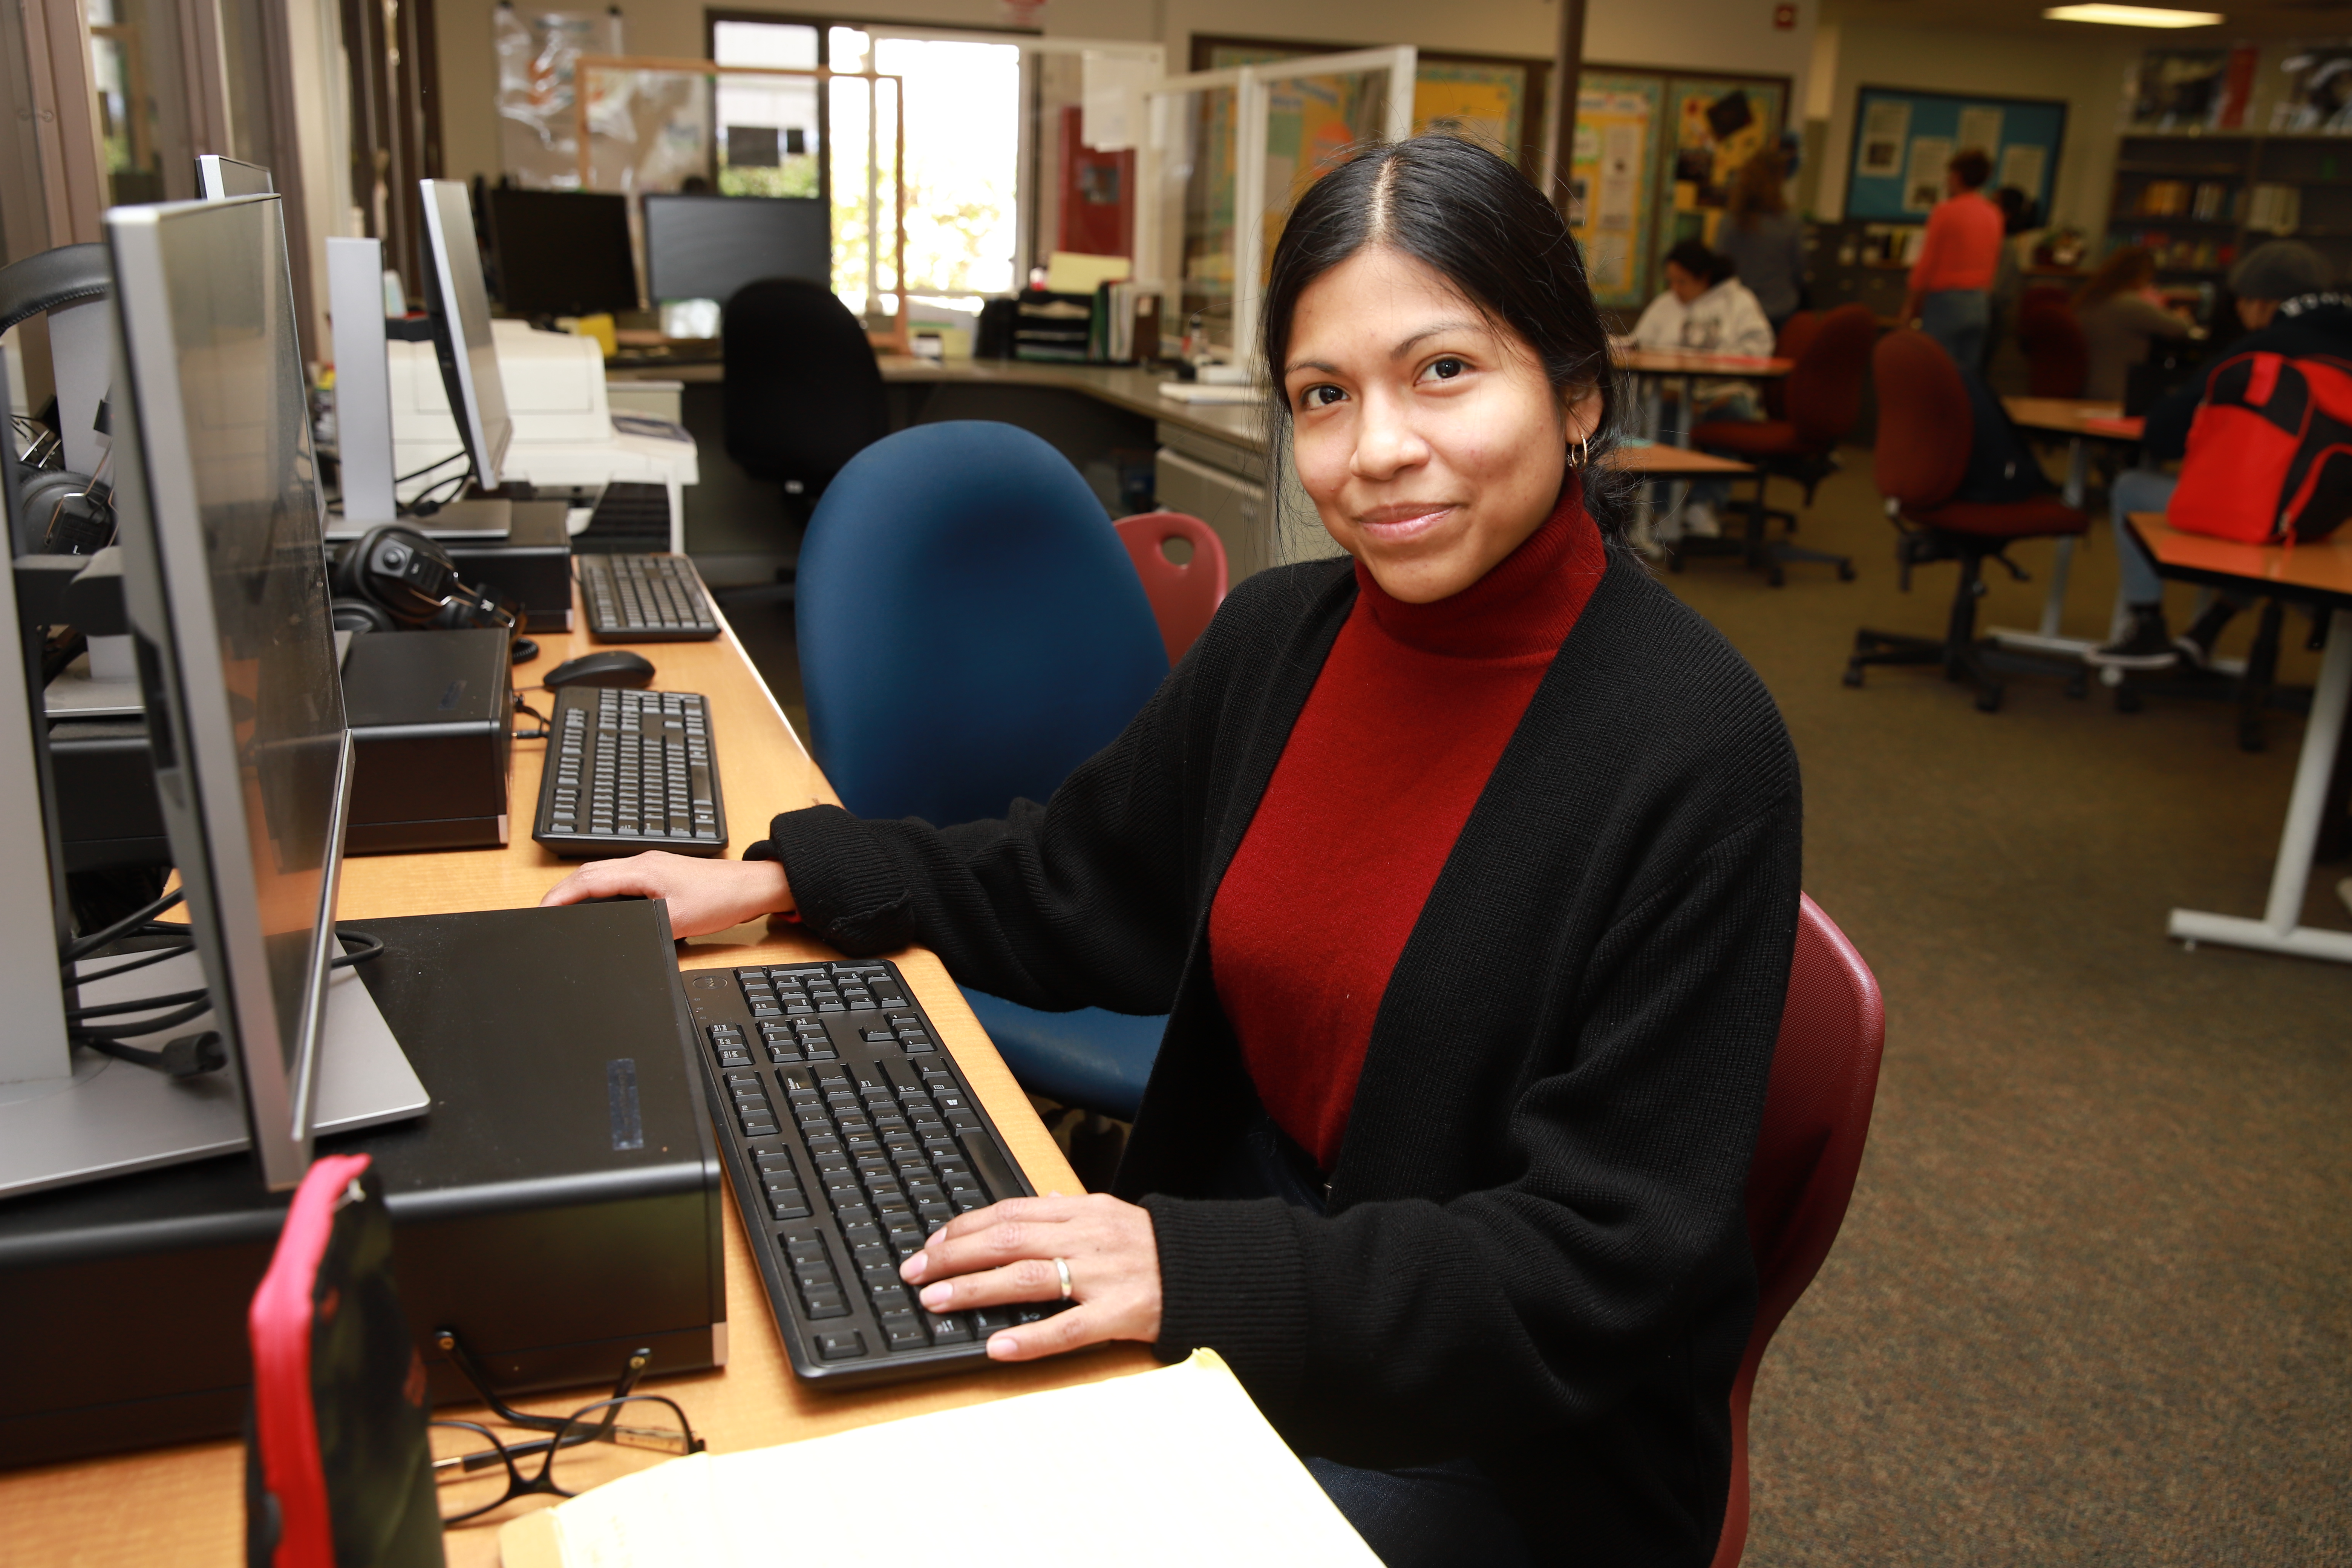 Woman working towards employment goals at computer in Career Center 